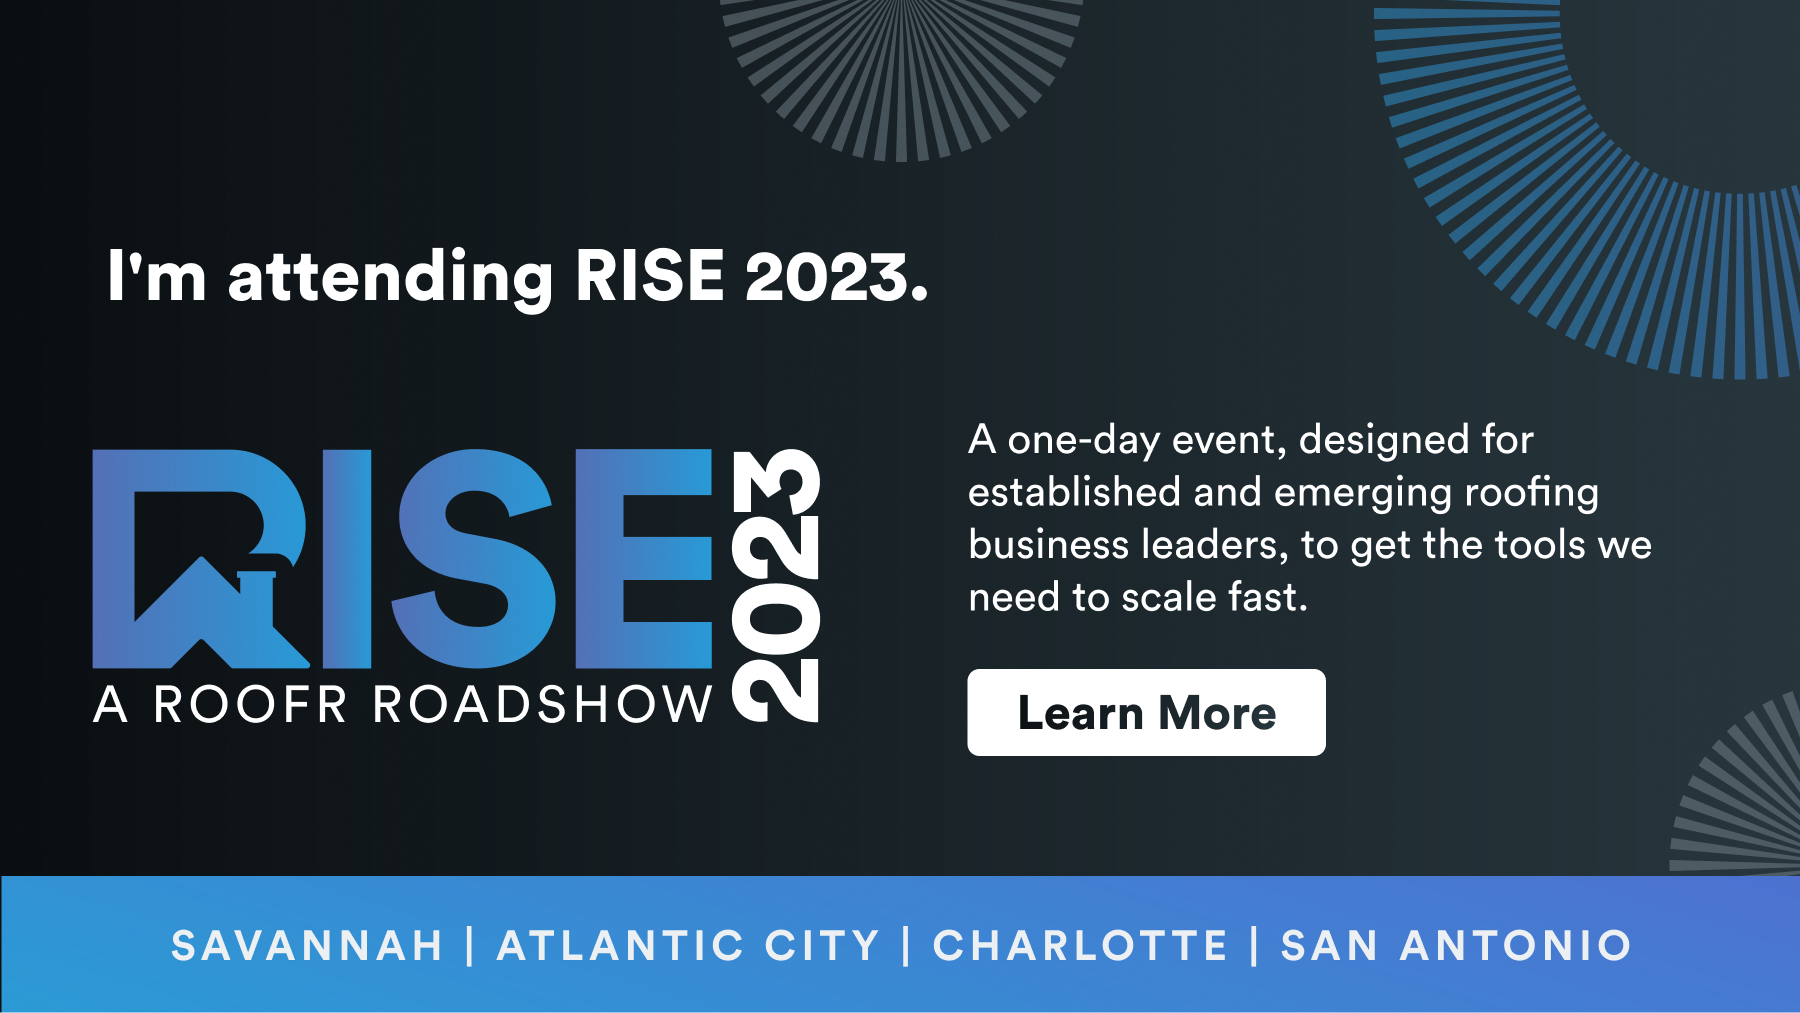 RISE2023-TW-Social-Share-Attendees